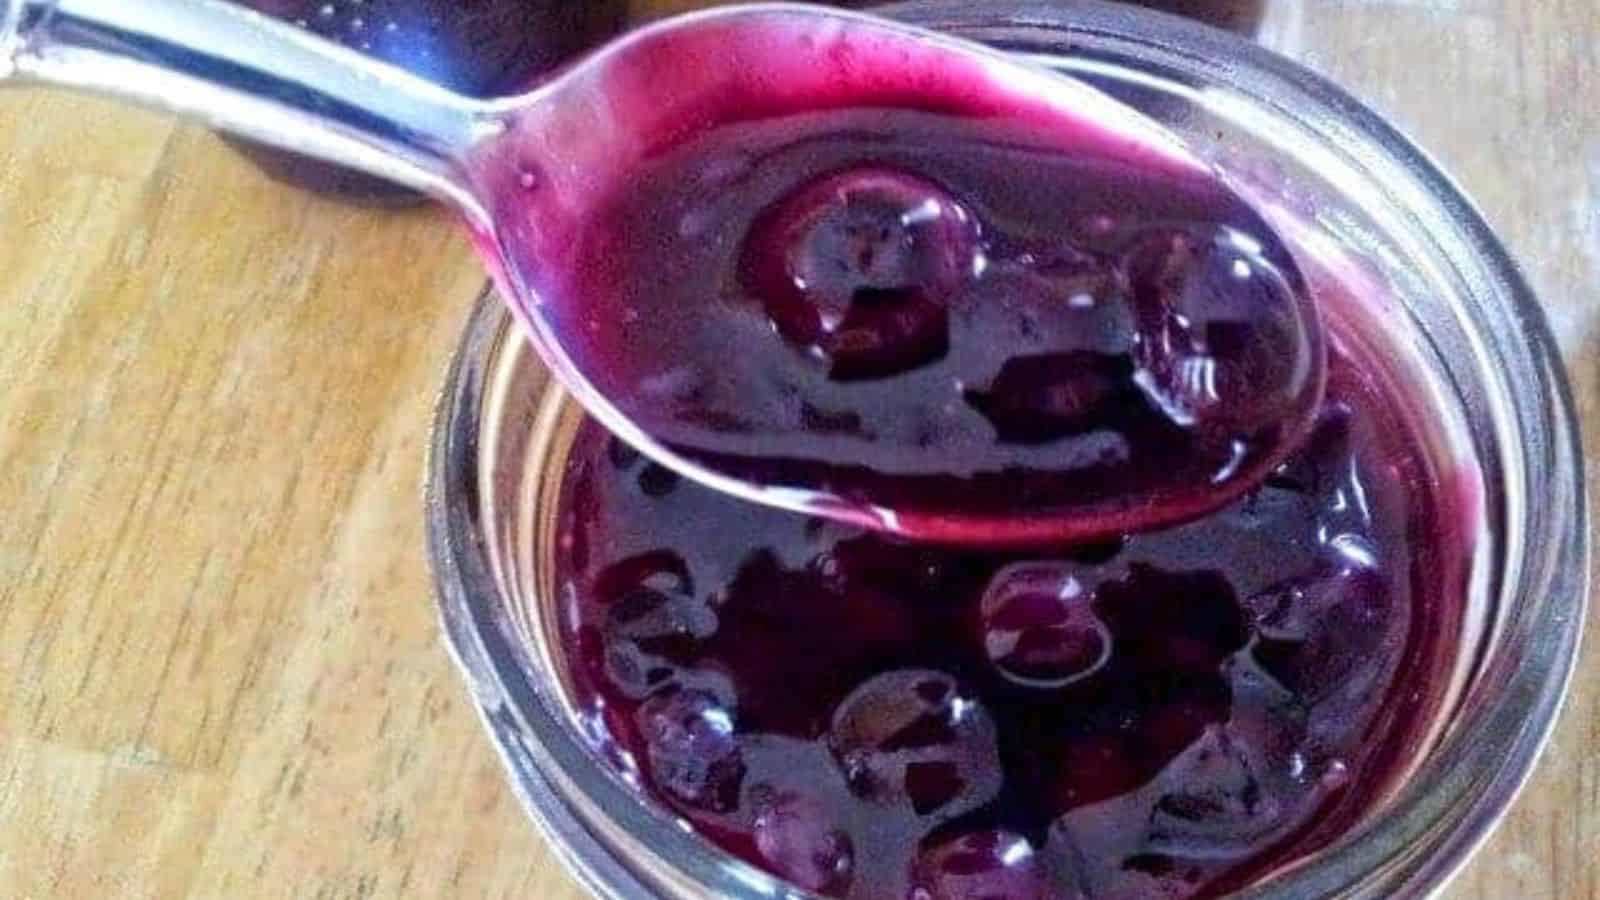 Overhead shot of a spoon containing blueberry syrup being held over a jar with more syrup.